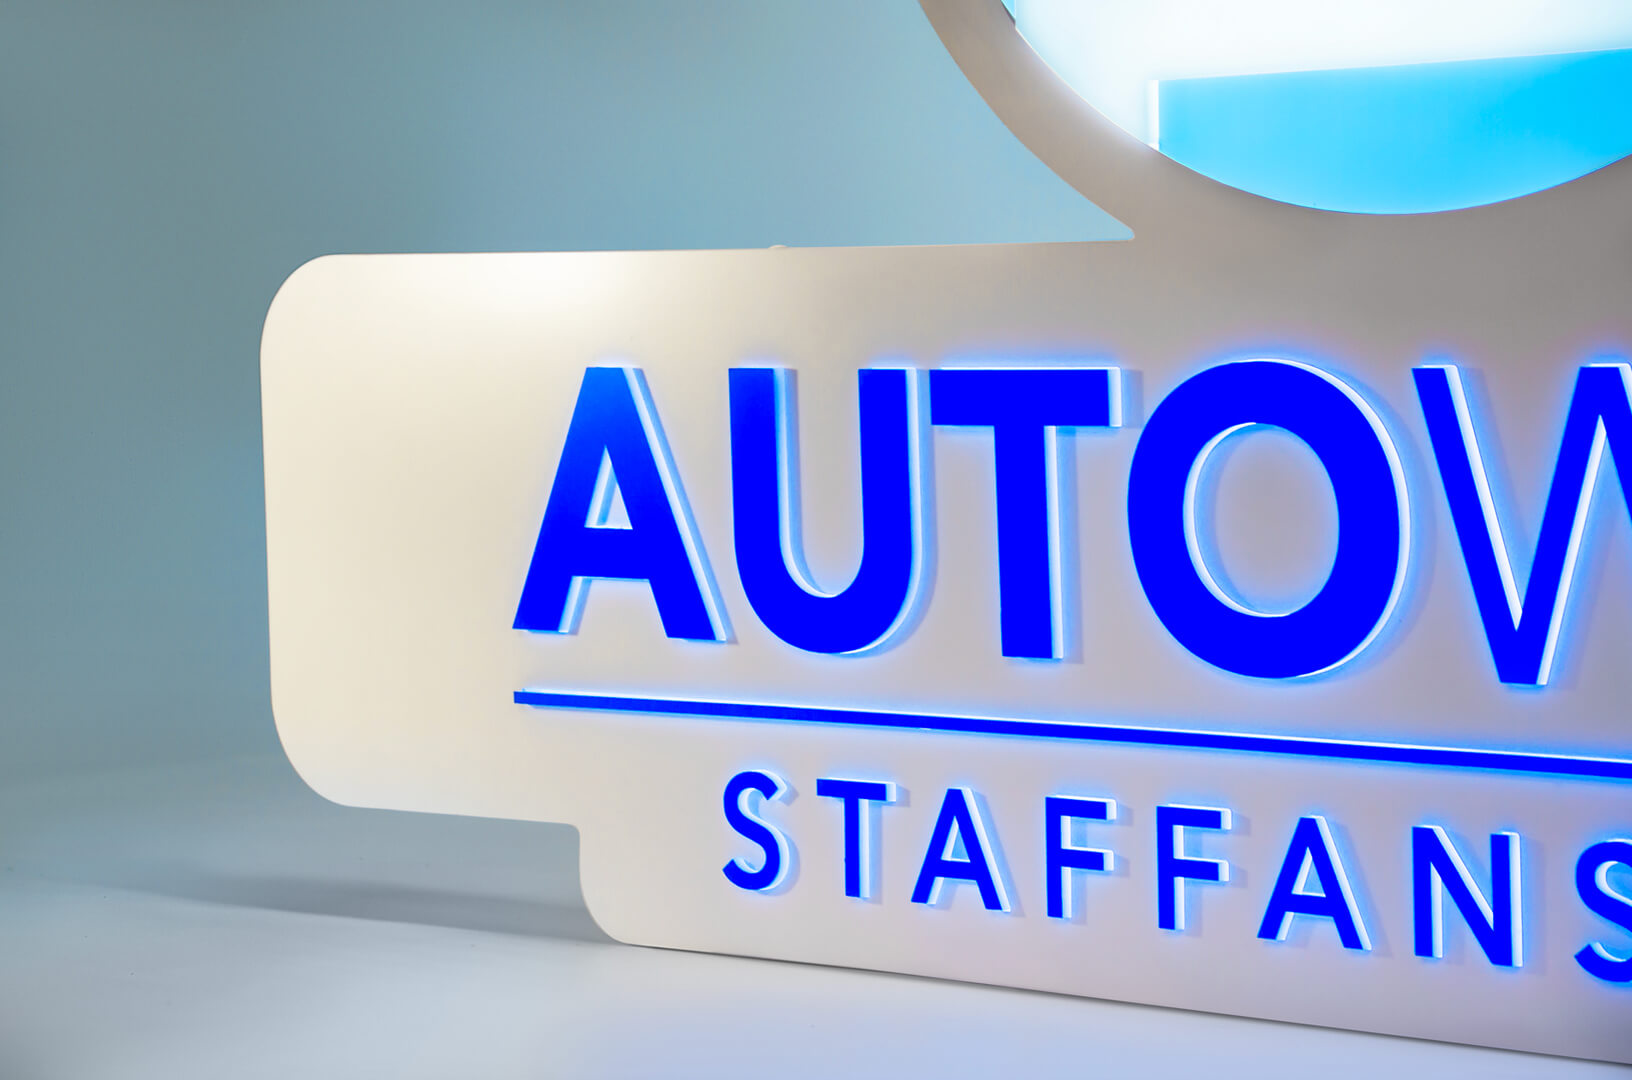 Autowash - Letters with background and logo for Autowash company, single-sided coffer.